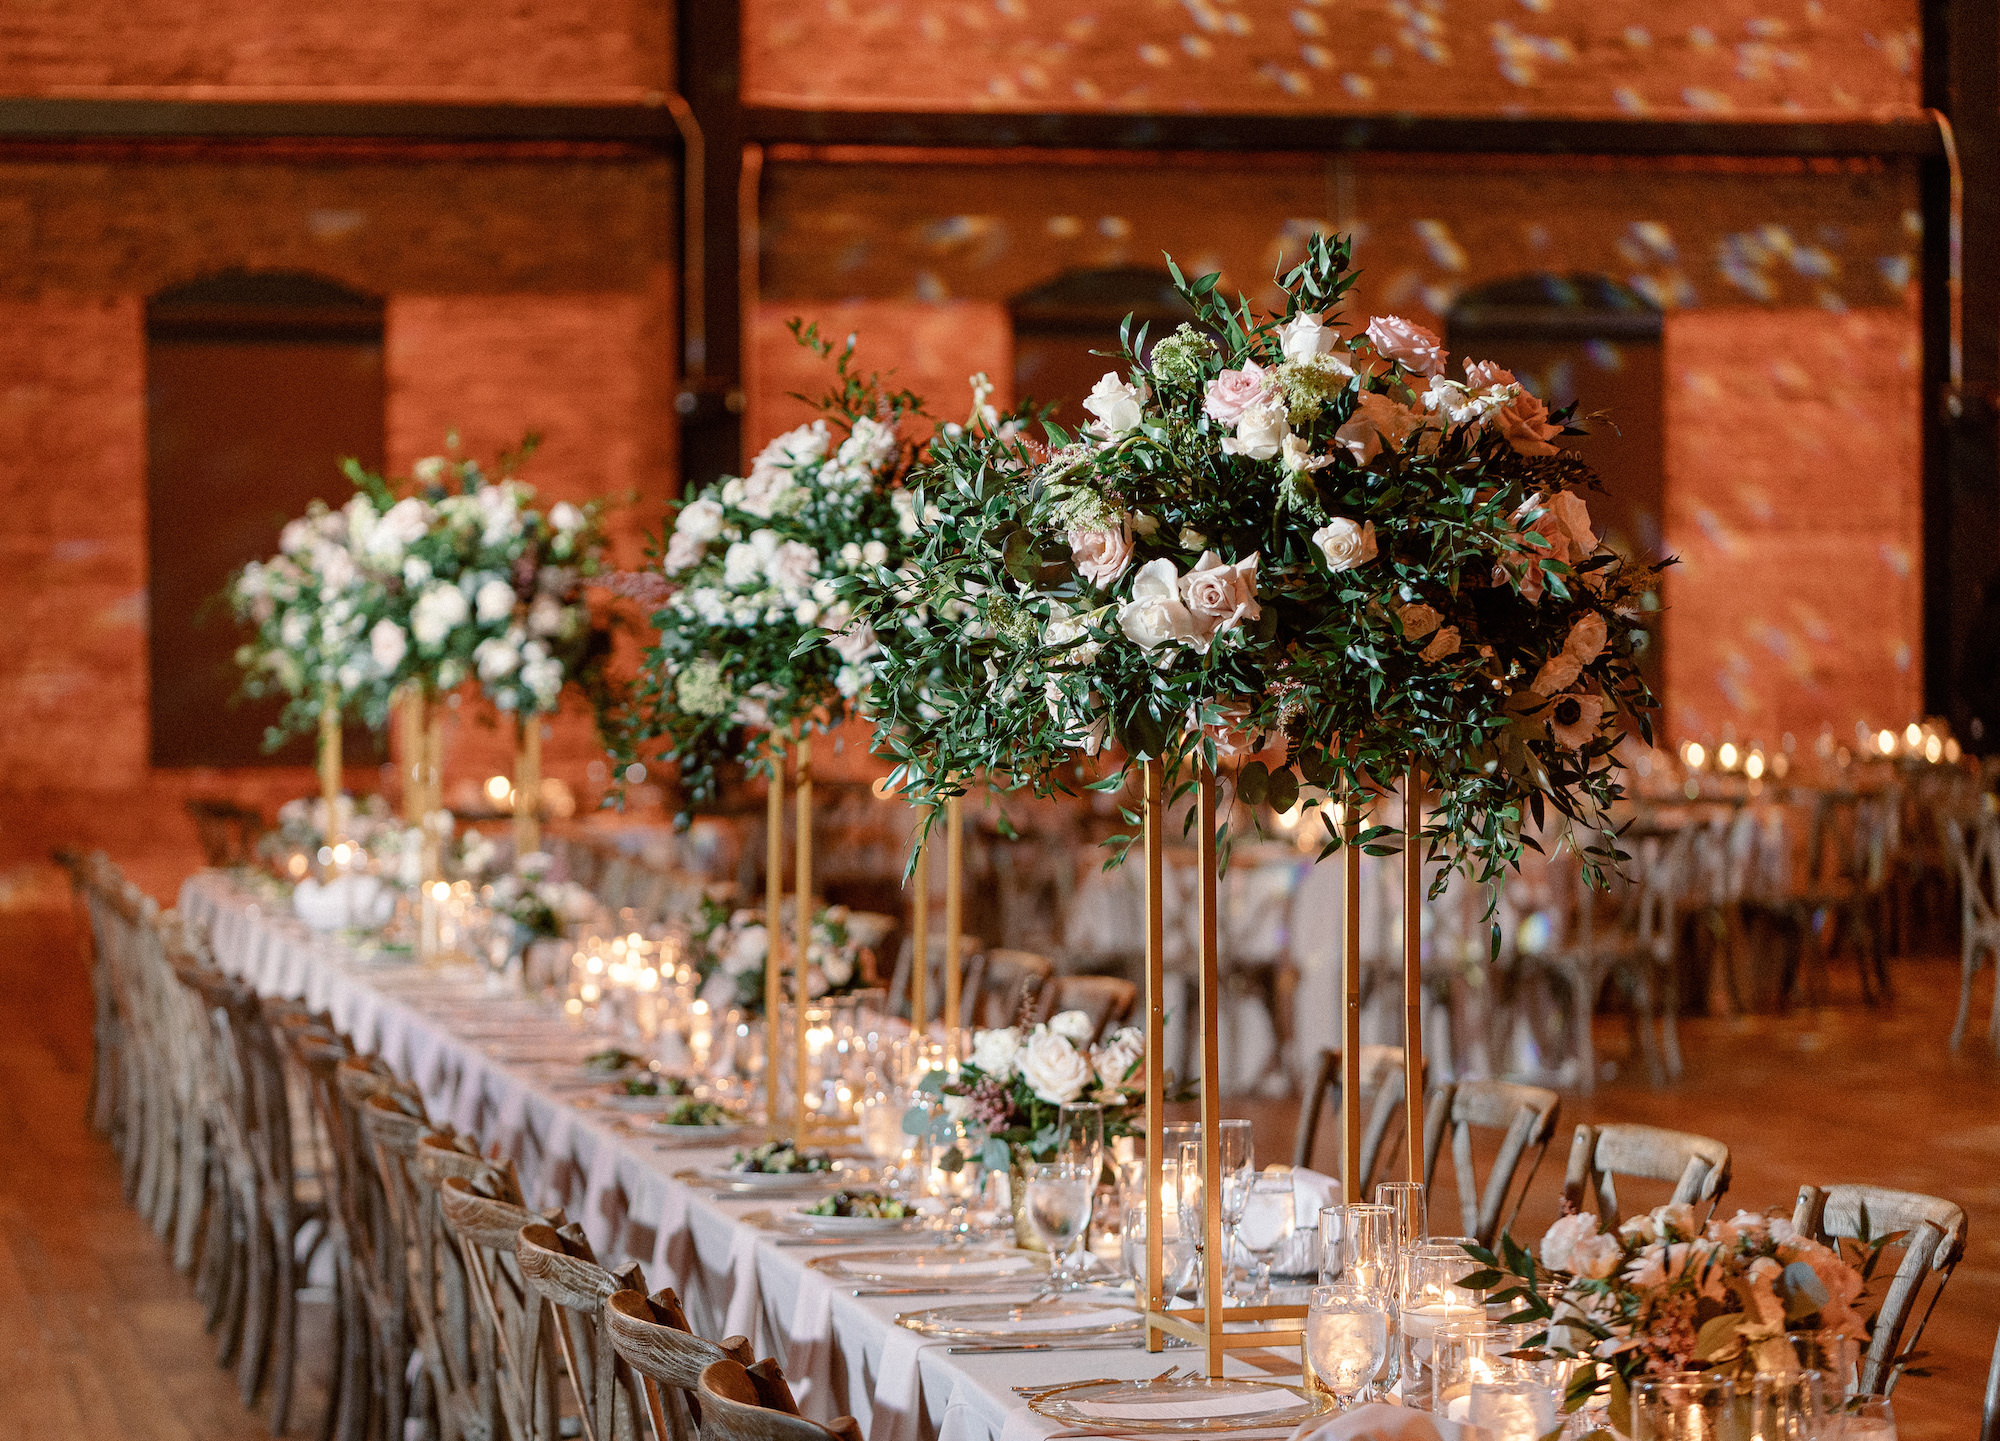 Long Feasting Table Wedding Reception Inspiration | Tall Blush Pink Rose and Greenery and Gold Centerpiece | Spring Wedding Reception Inspiration | Tampa Bay Wedding Venue Armature Works